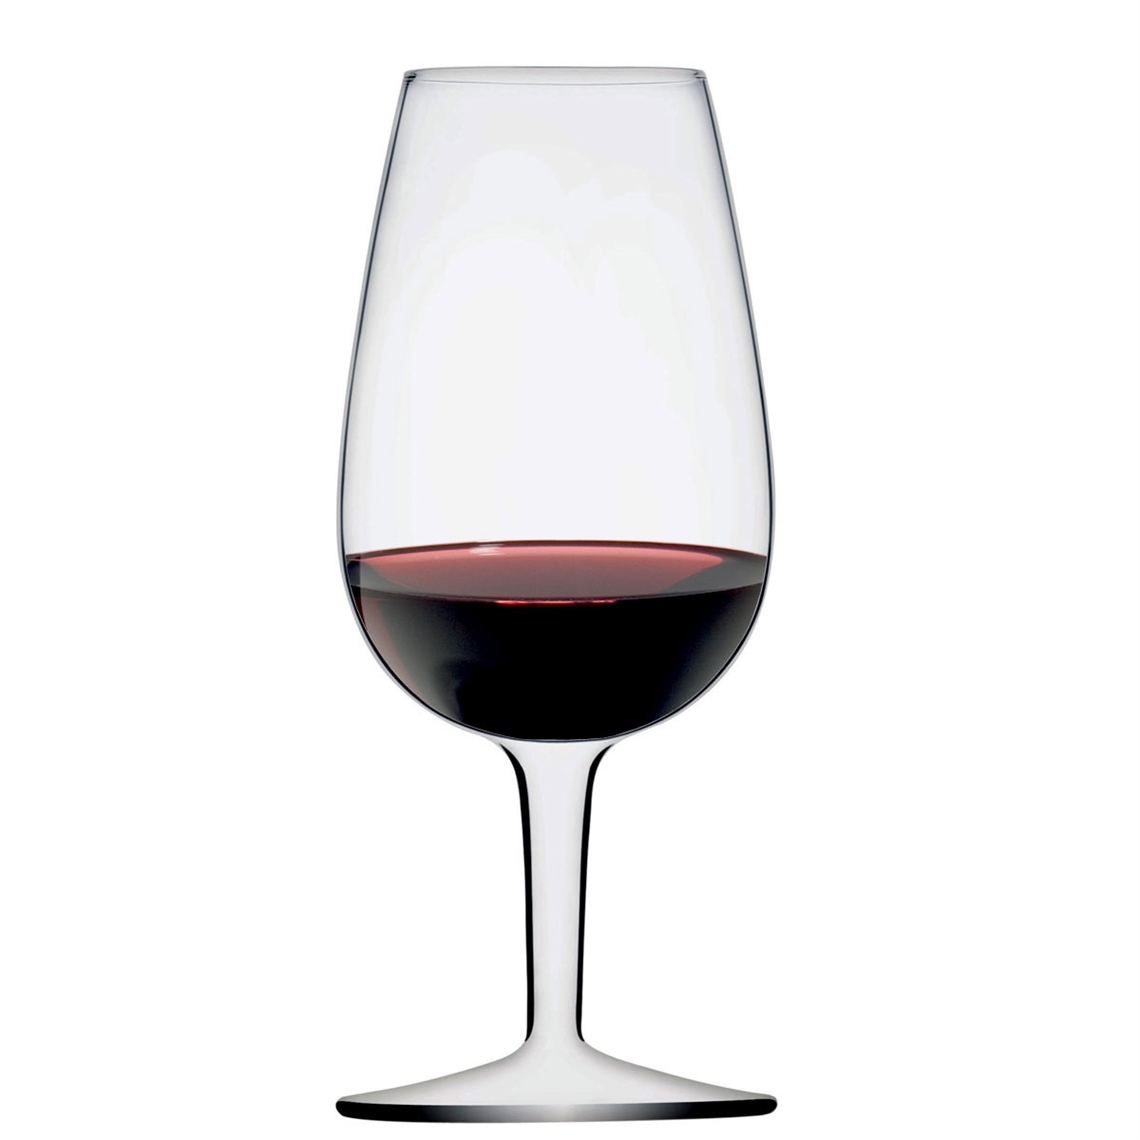 View more aroma academy from our Wine Tasting Glasses range